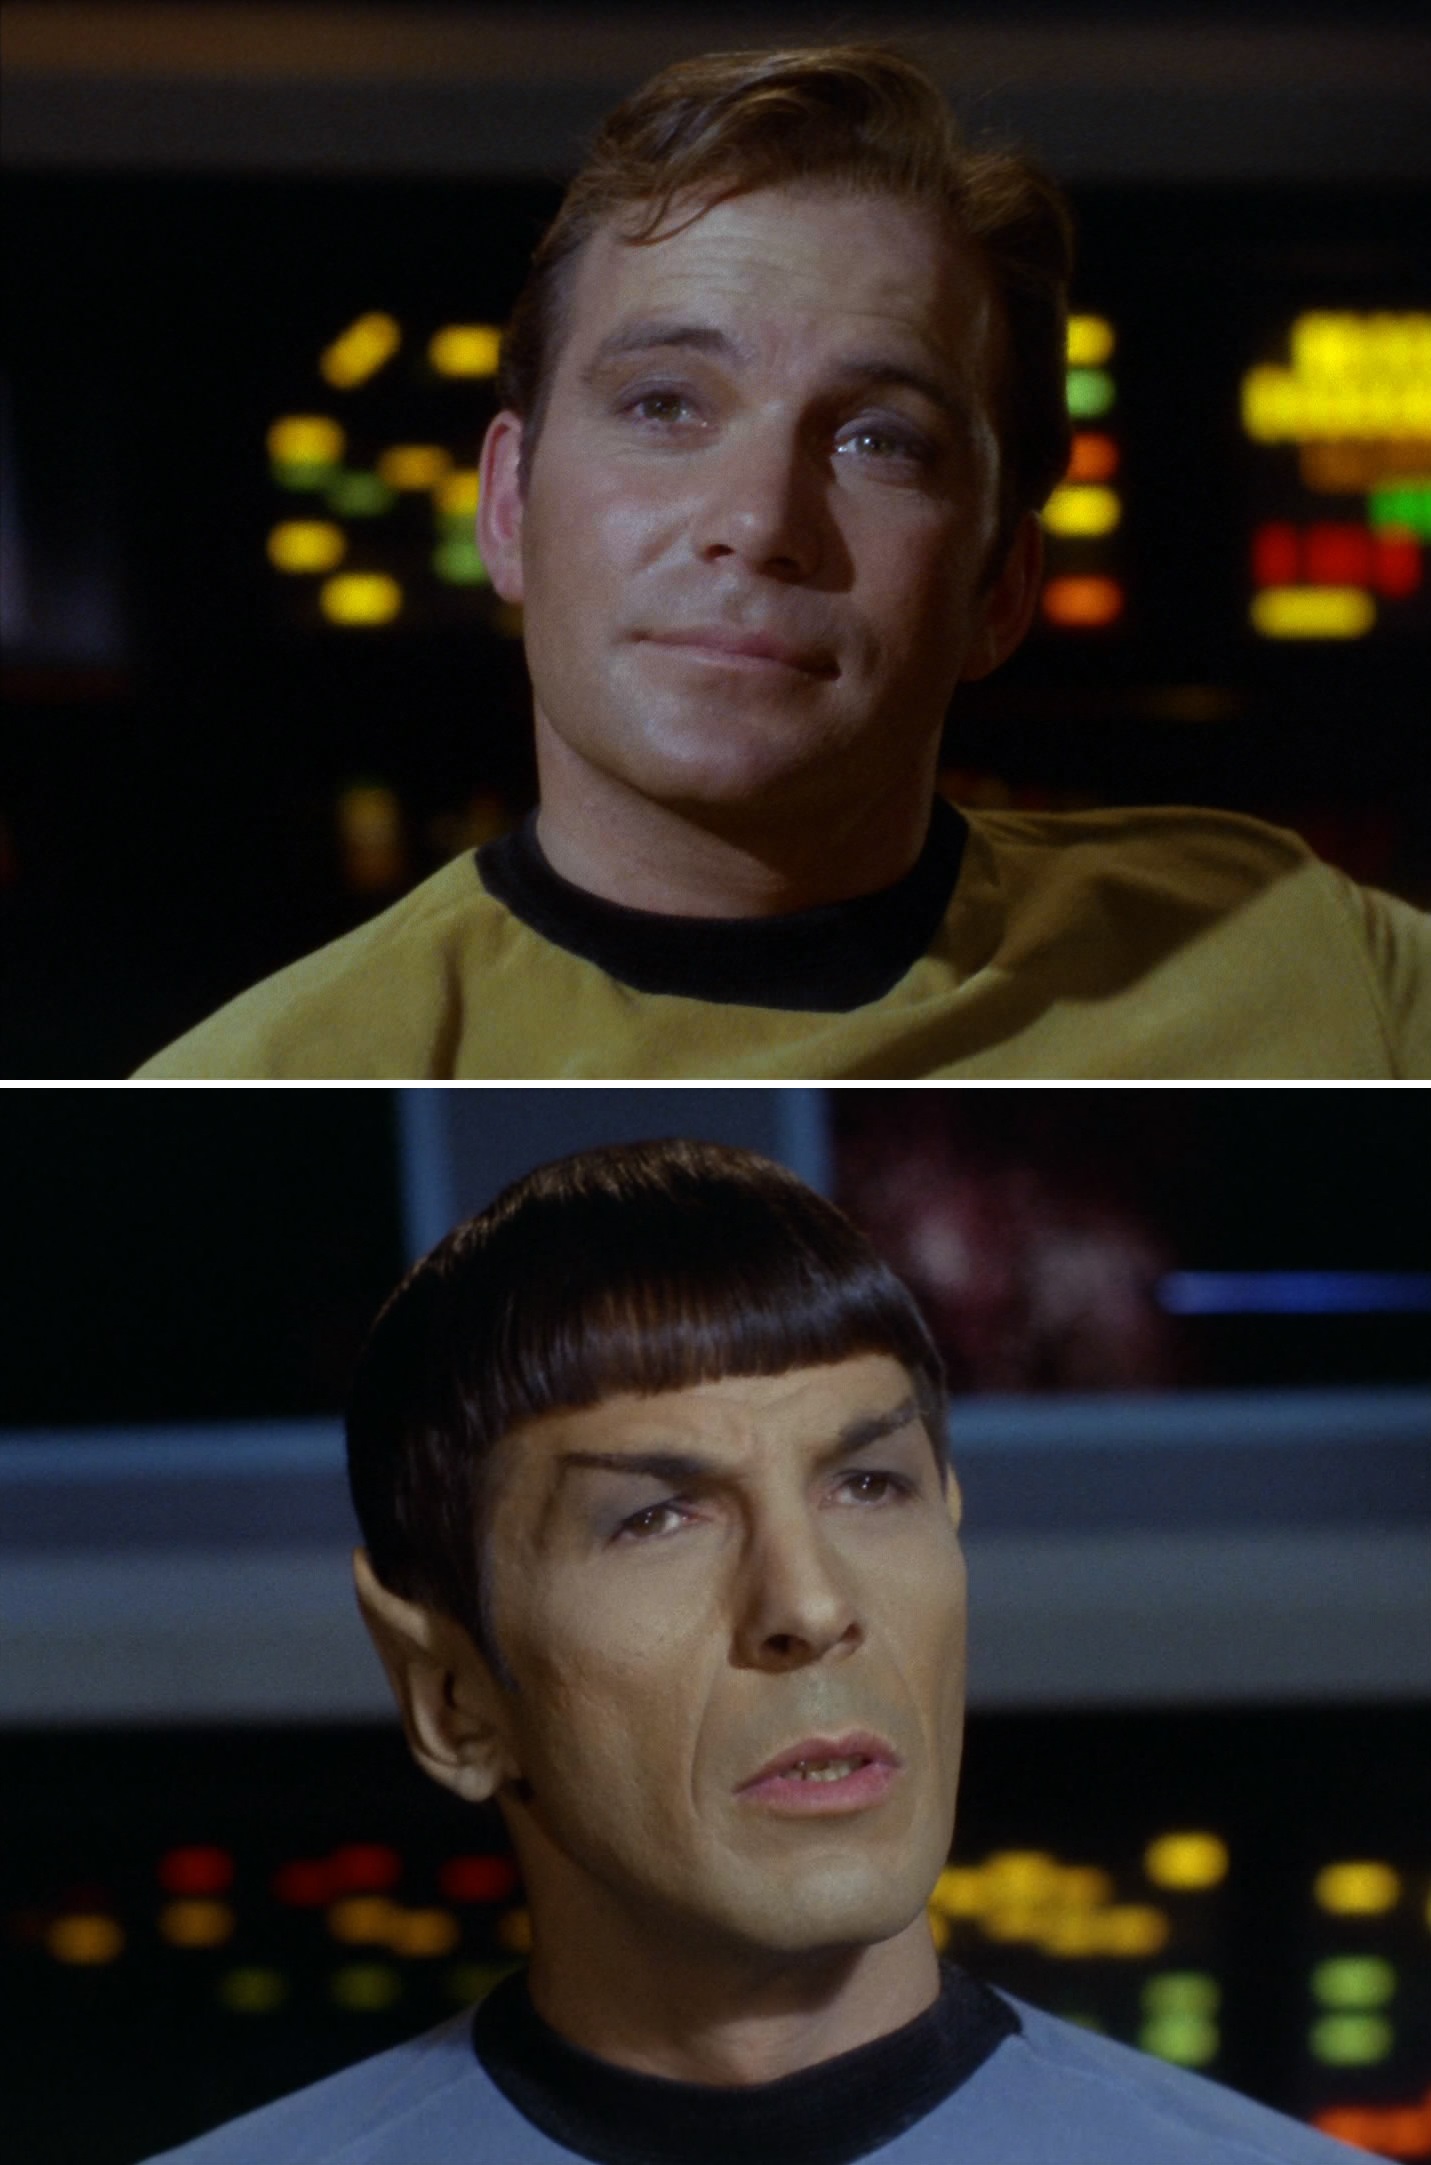 No "Spock Kirk Human" memes have been featured yet. 